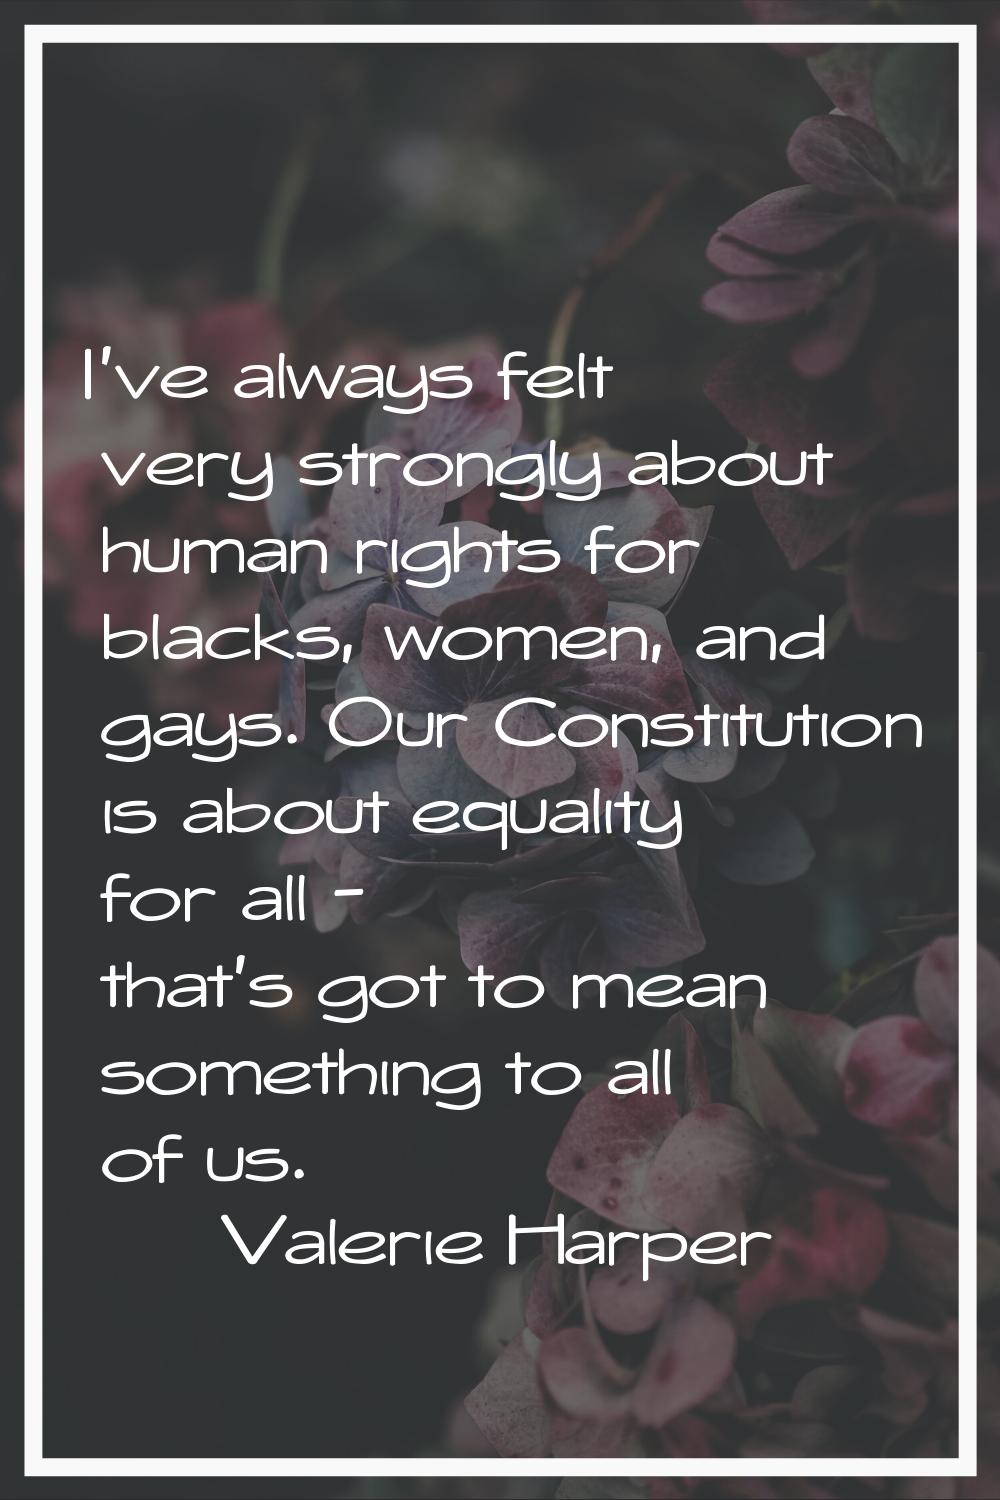 I've always felt very strongly about human rights for blacks, women, and gays. Our Constitution is 